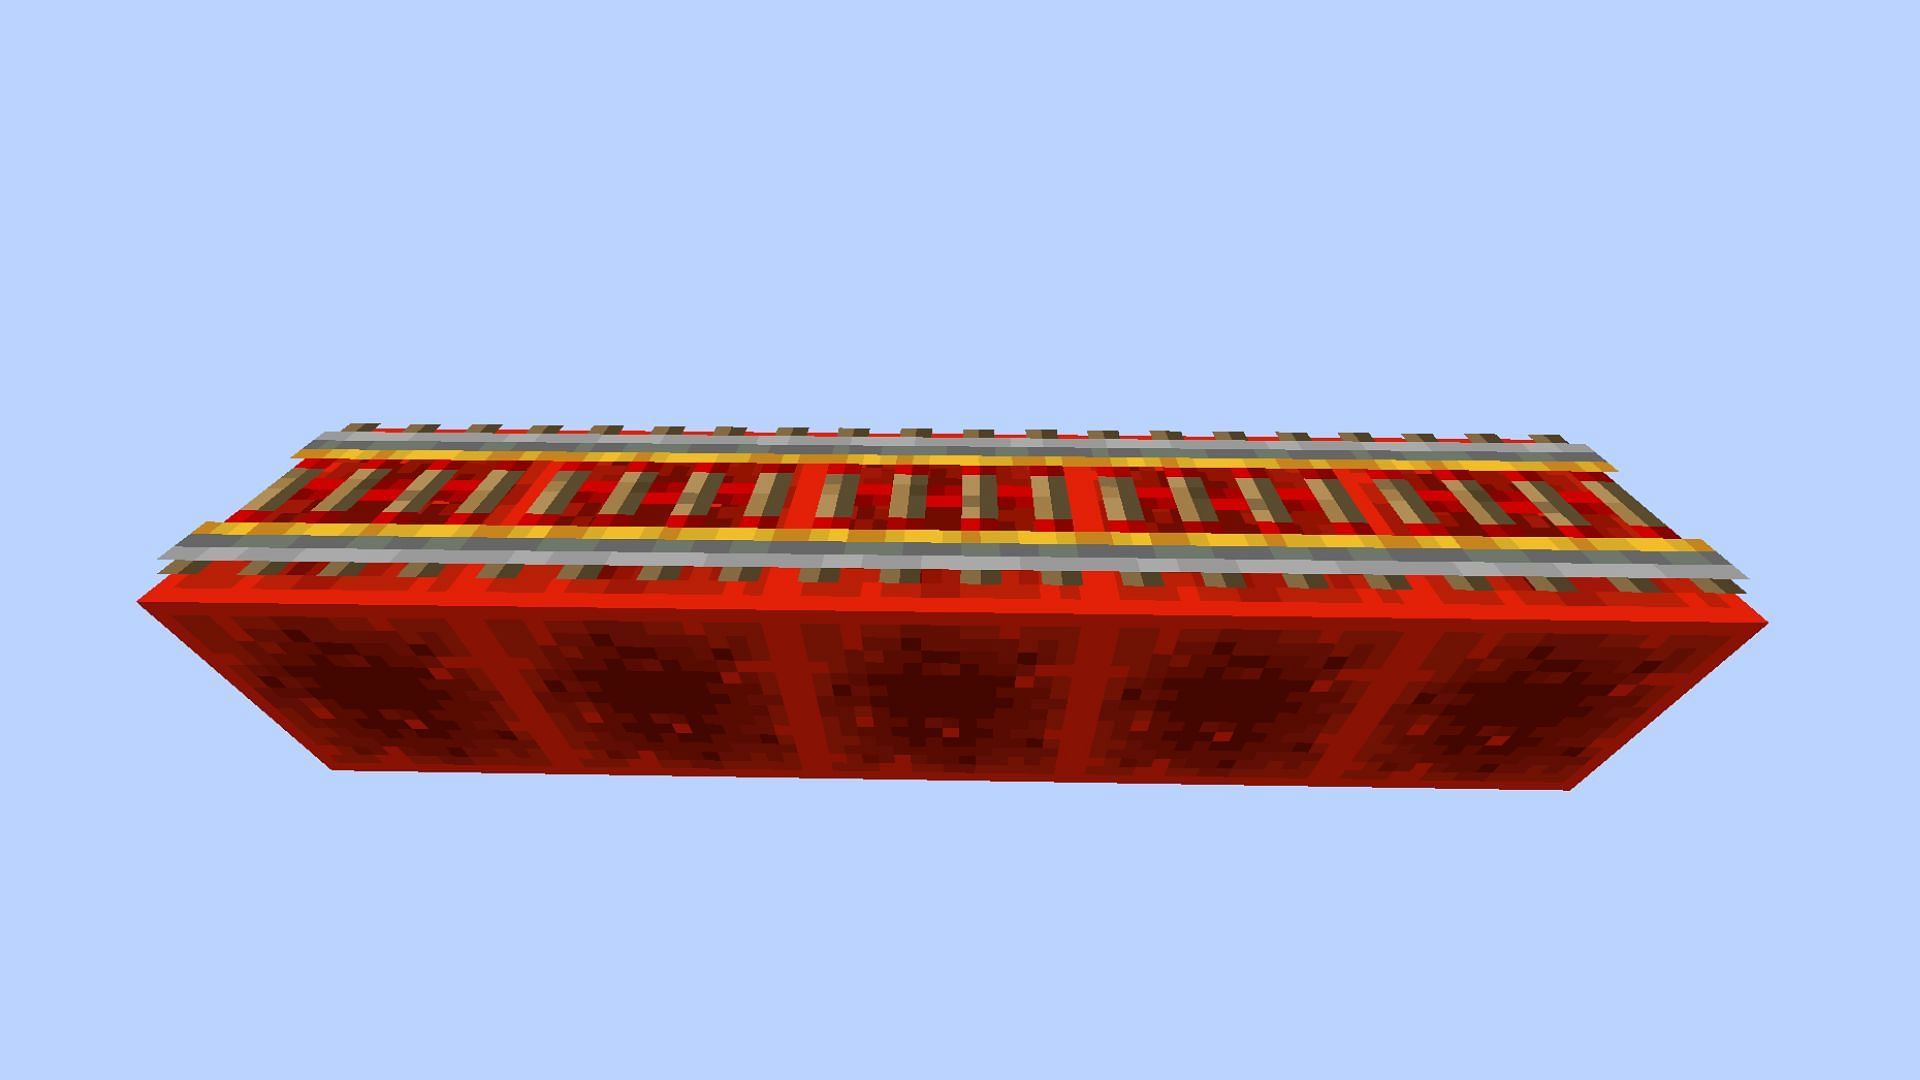 Blocks of redstone are the main source of power in many Minecraft builds (Image via Mojang)